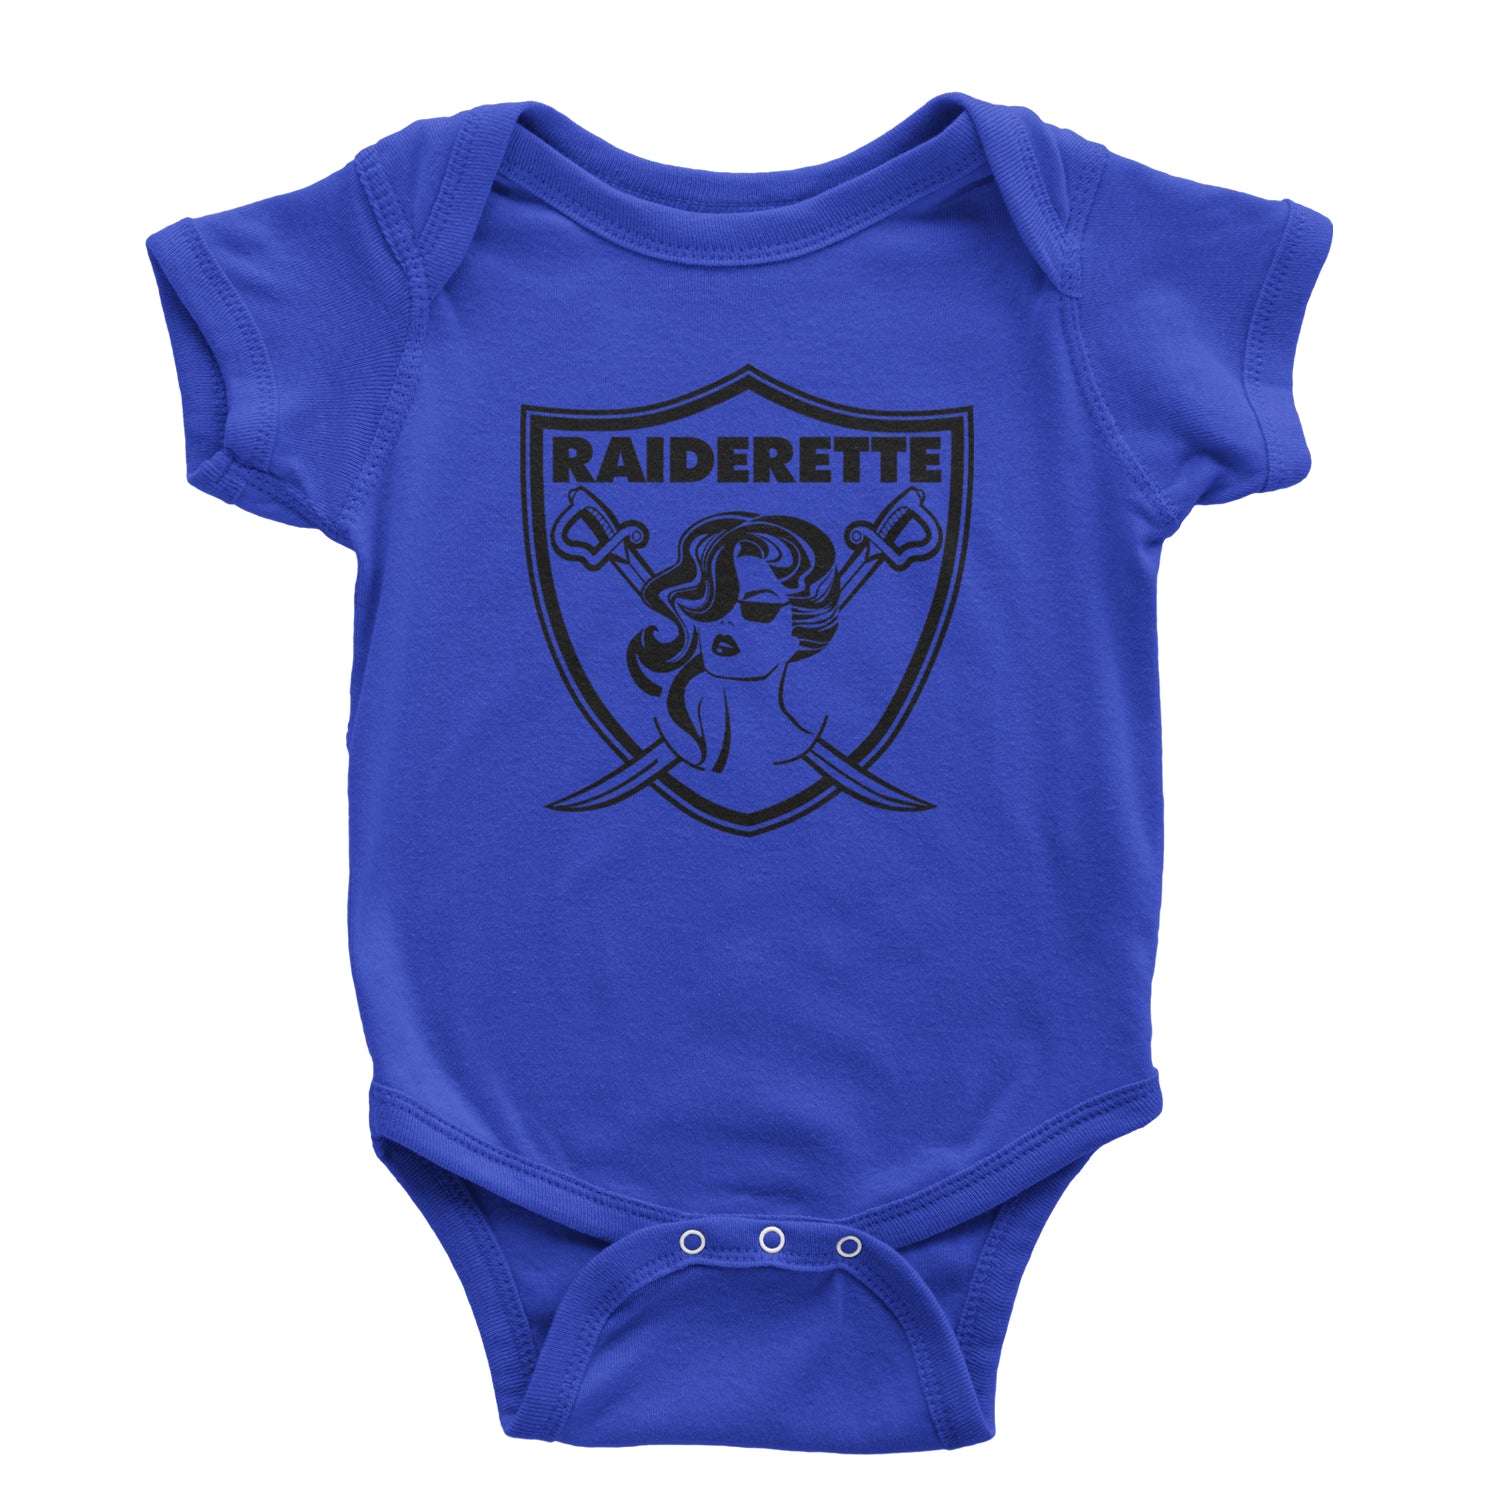 Raiderette Football Gameday Ready Infant One-Piece Romper Bodysuit and Toddler T-shirt Royal Blue